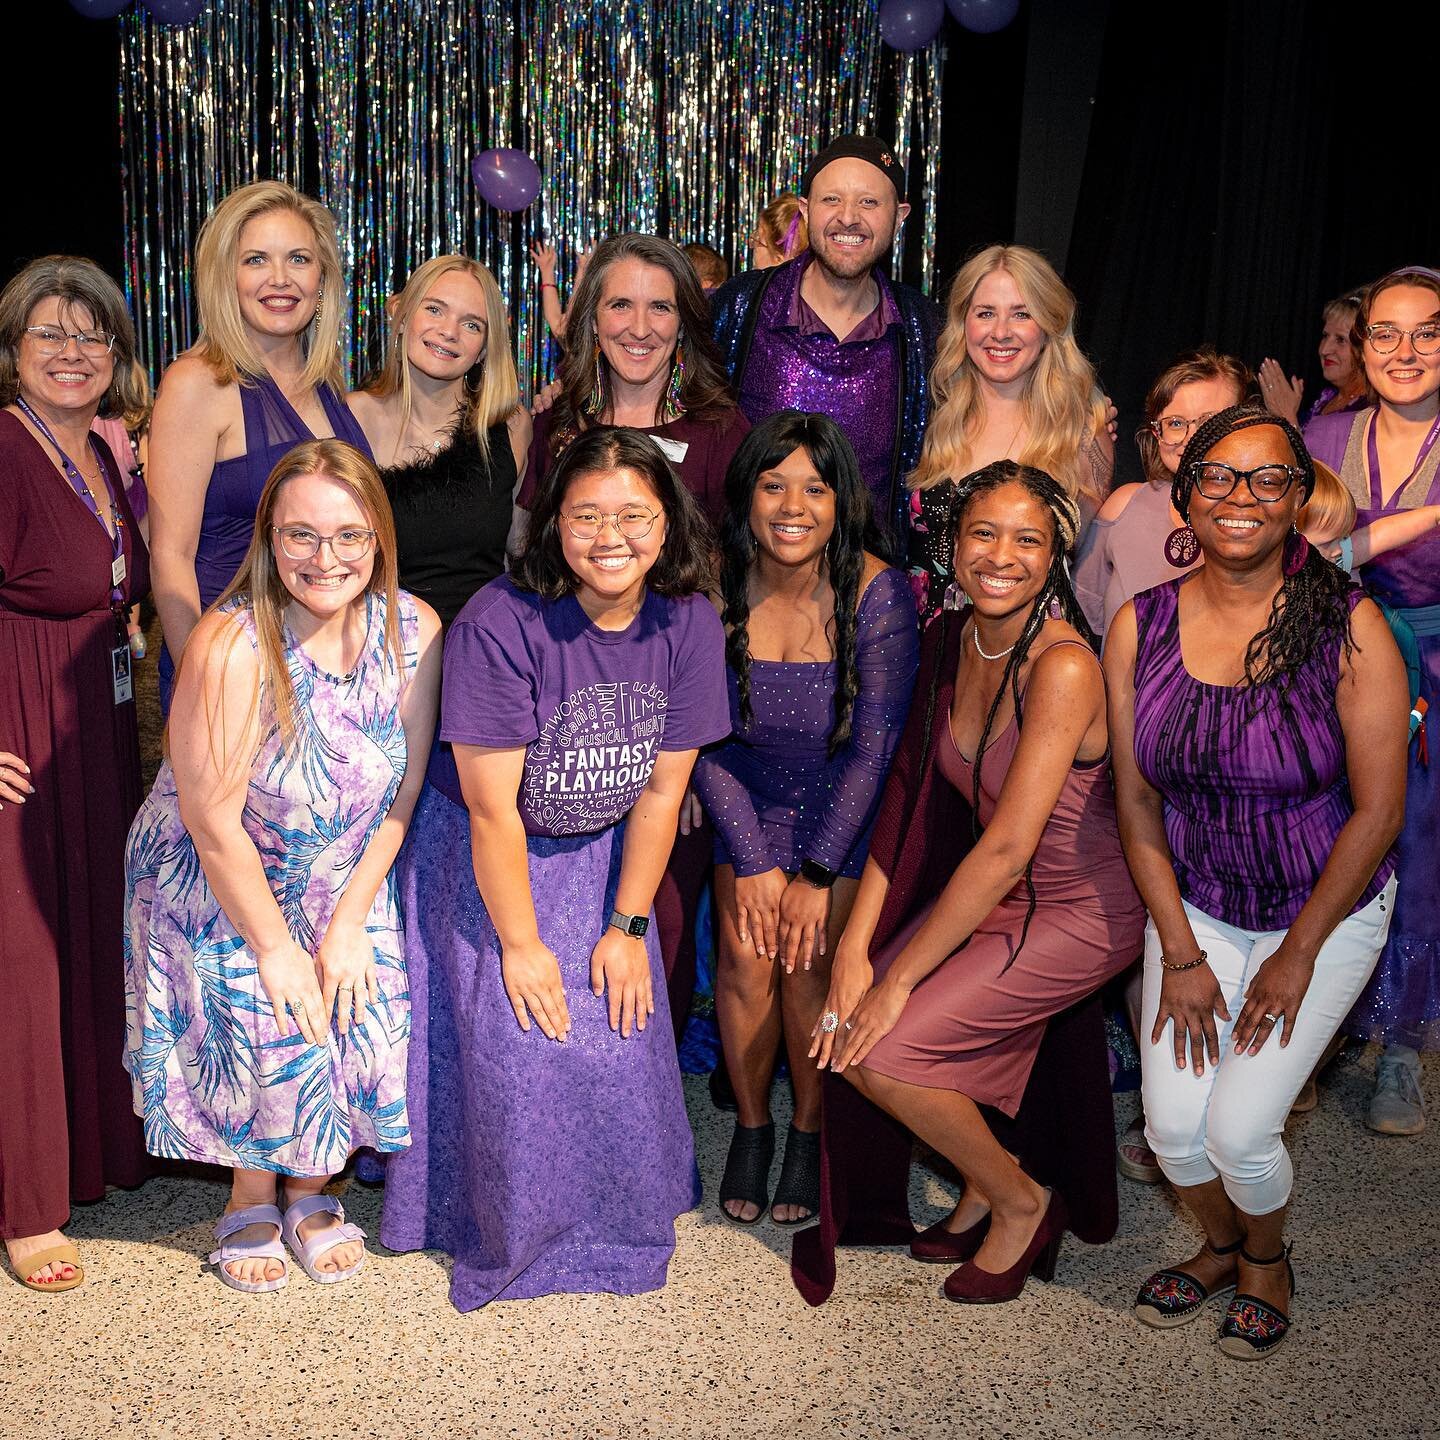 💜 What an incredible PURPLE filled evening! Thank you to everyone who came out and celebrated with us at our first annual Purple Party! We can&rsquo;t wait for the next one! 

A special congratulations to Marie Sexton and Scott Trites for being the 